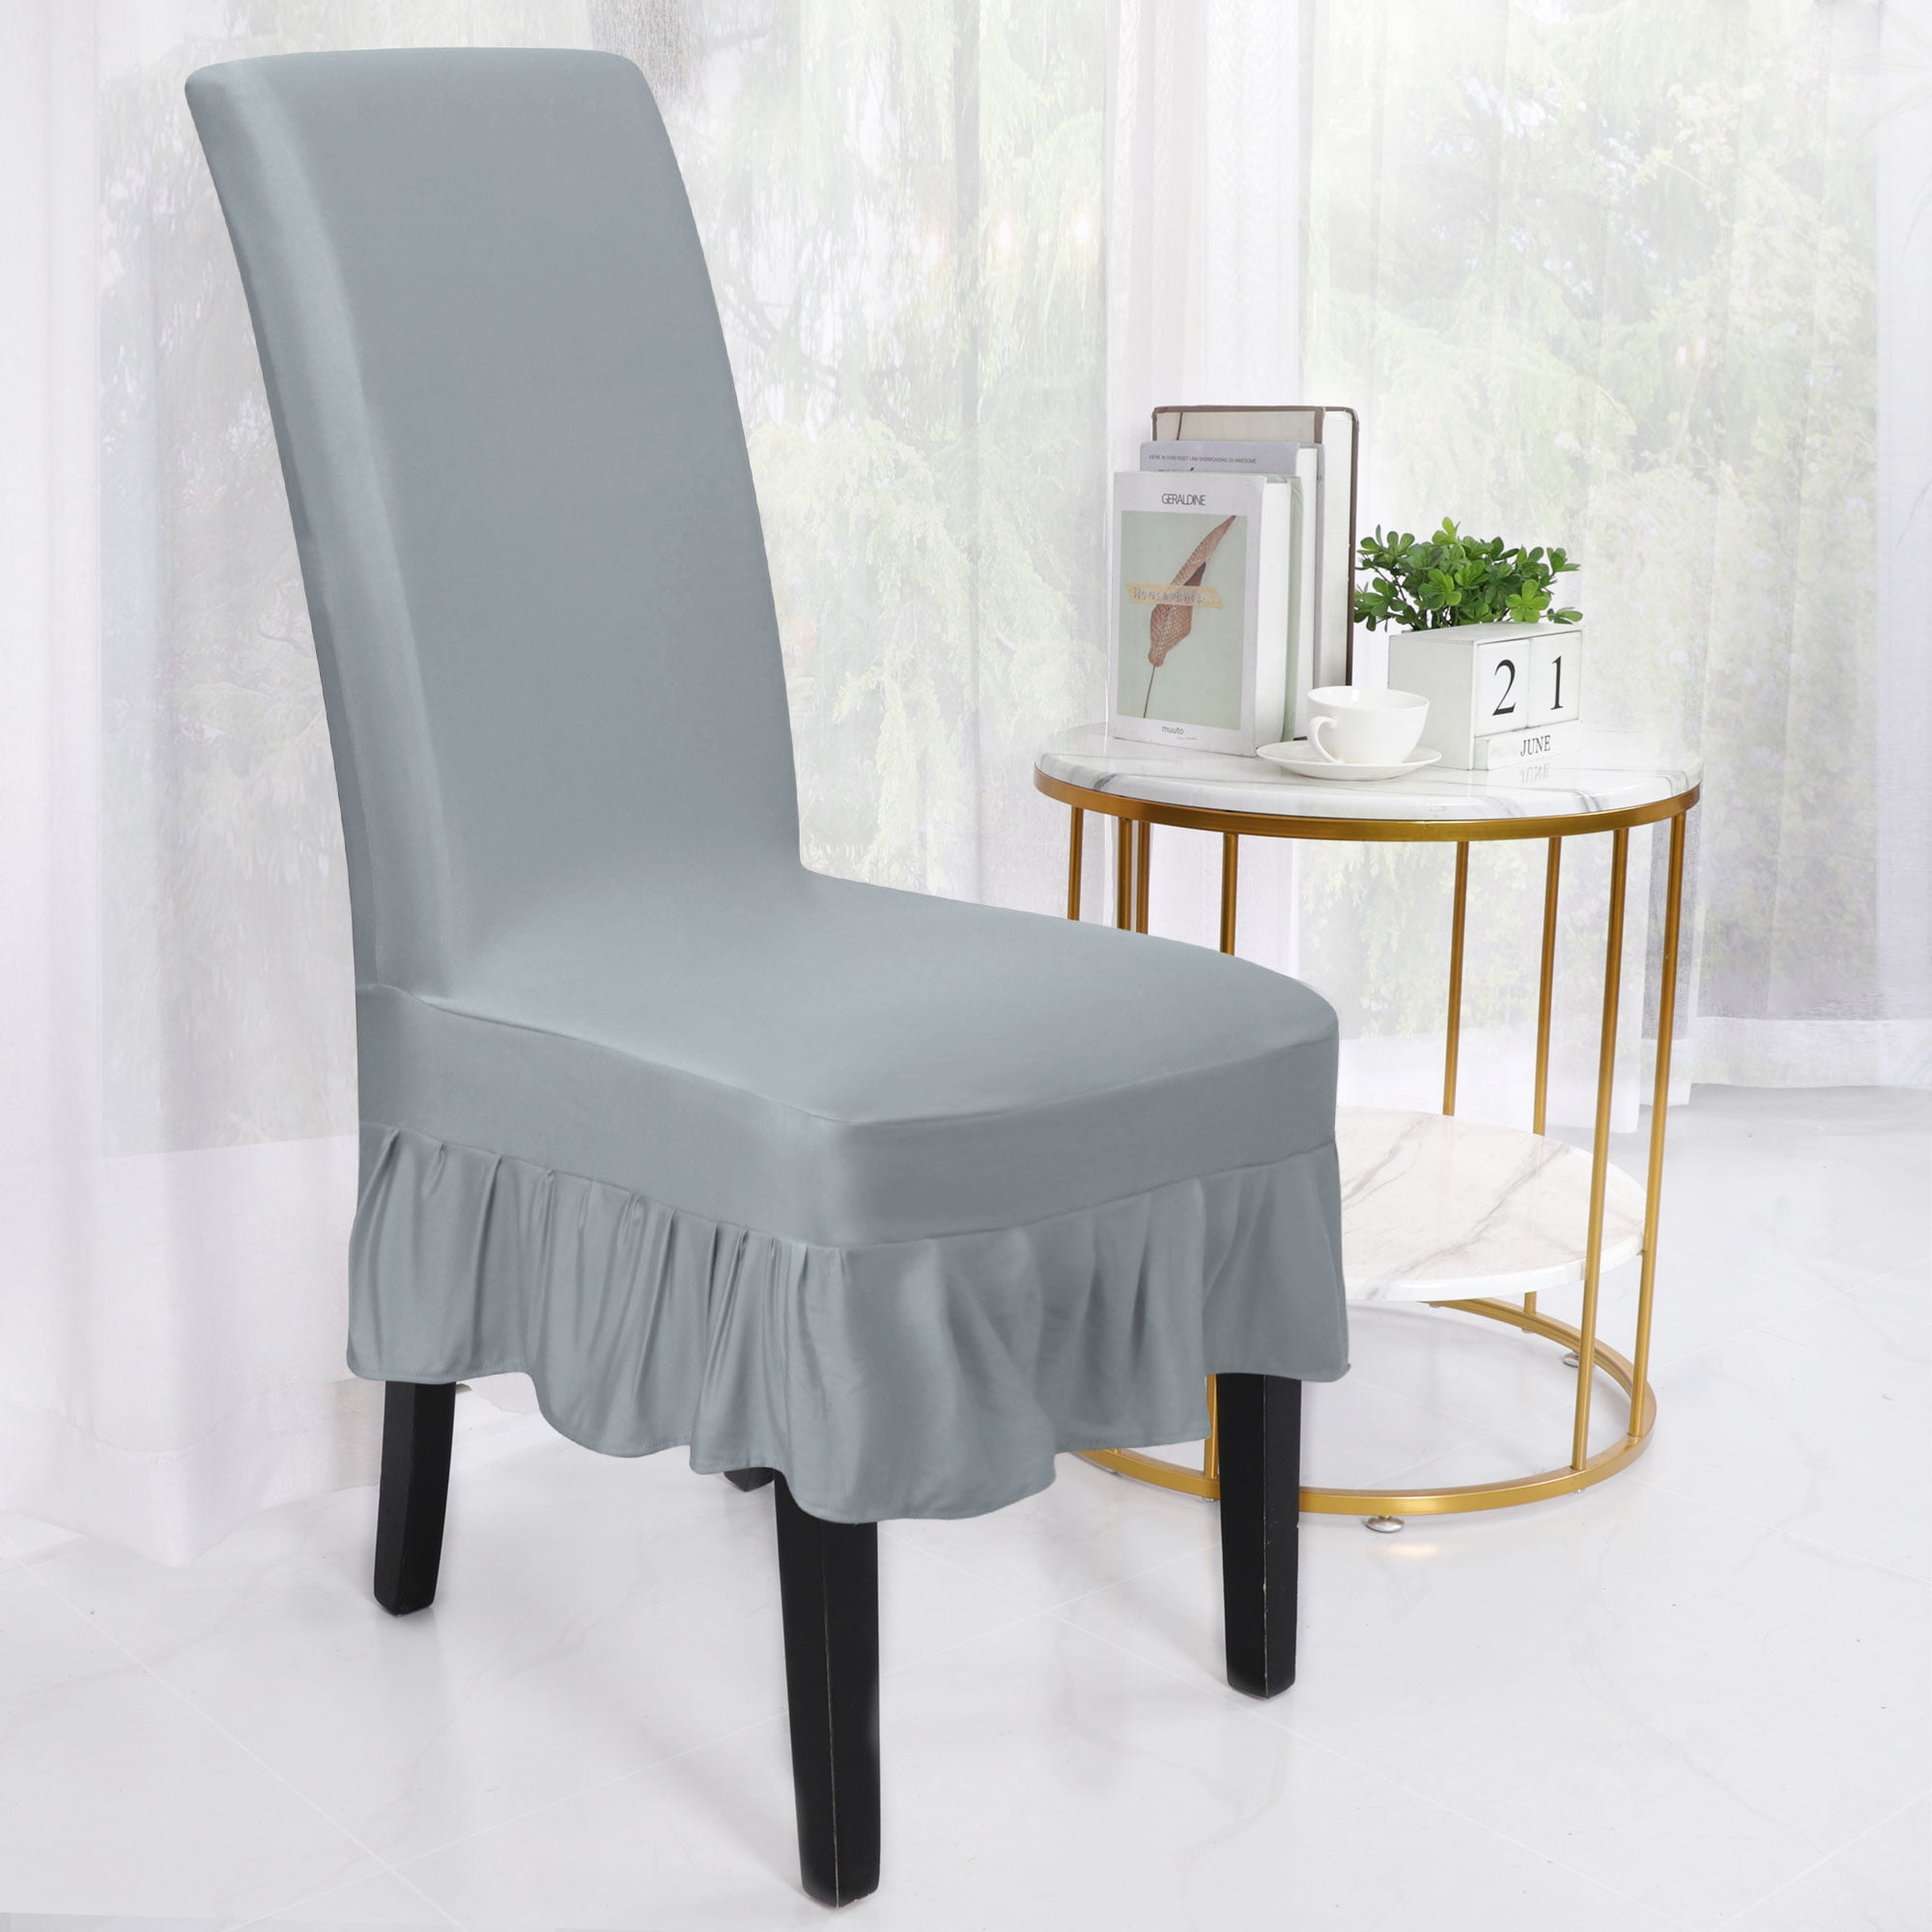 Designer Twill Details about   Sure Fit Chair Cover White 